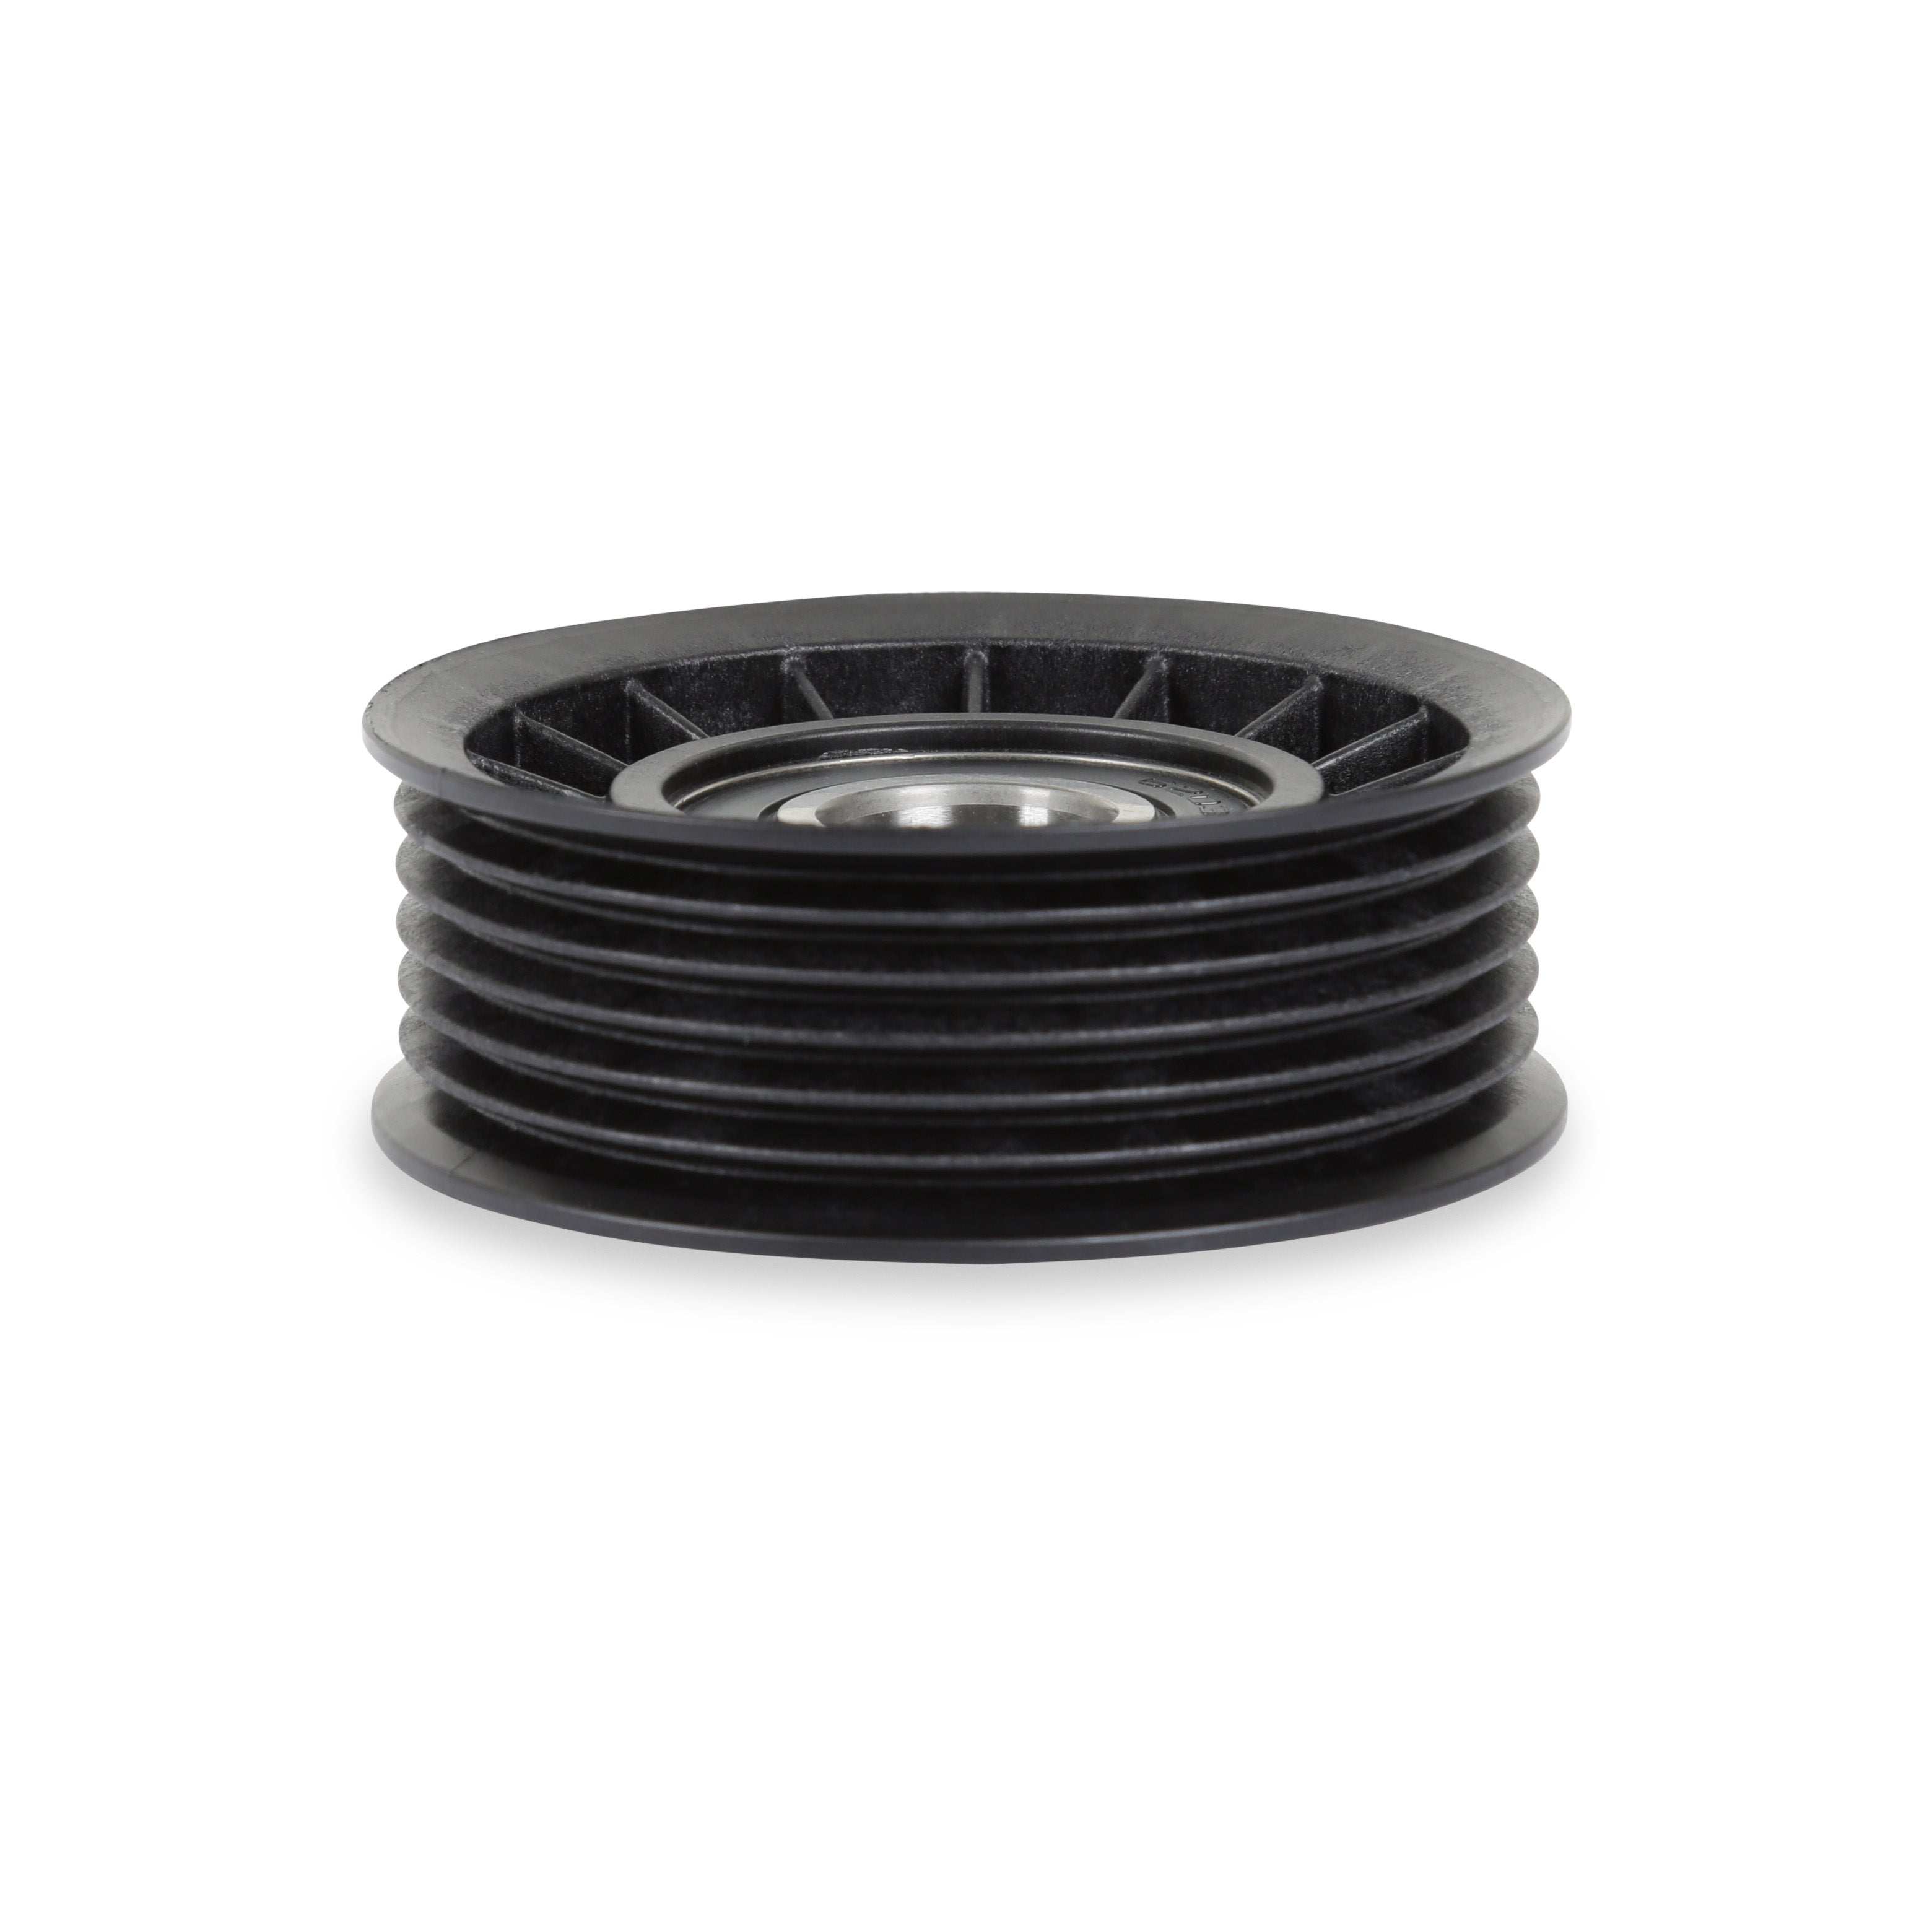 Holley Accessory Drive Belt Idler Pulley 97-344